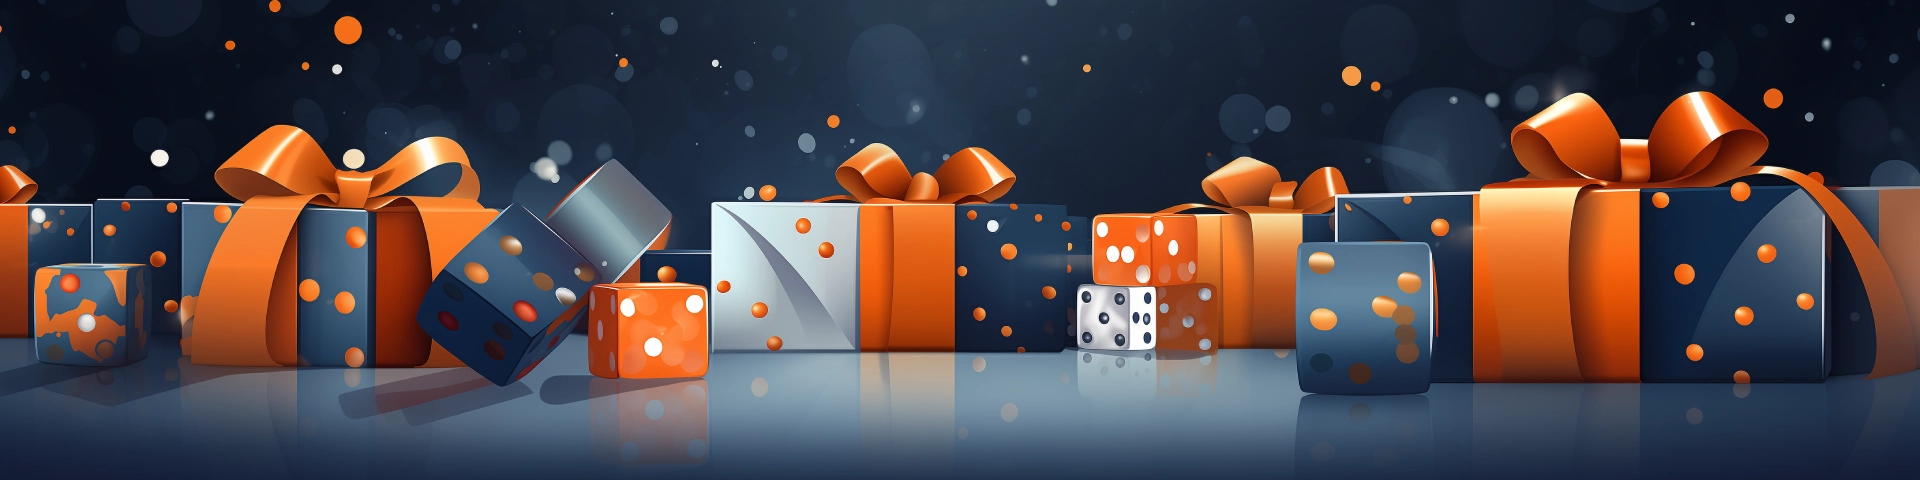 Gifts and dices in blue orange colors